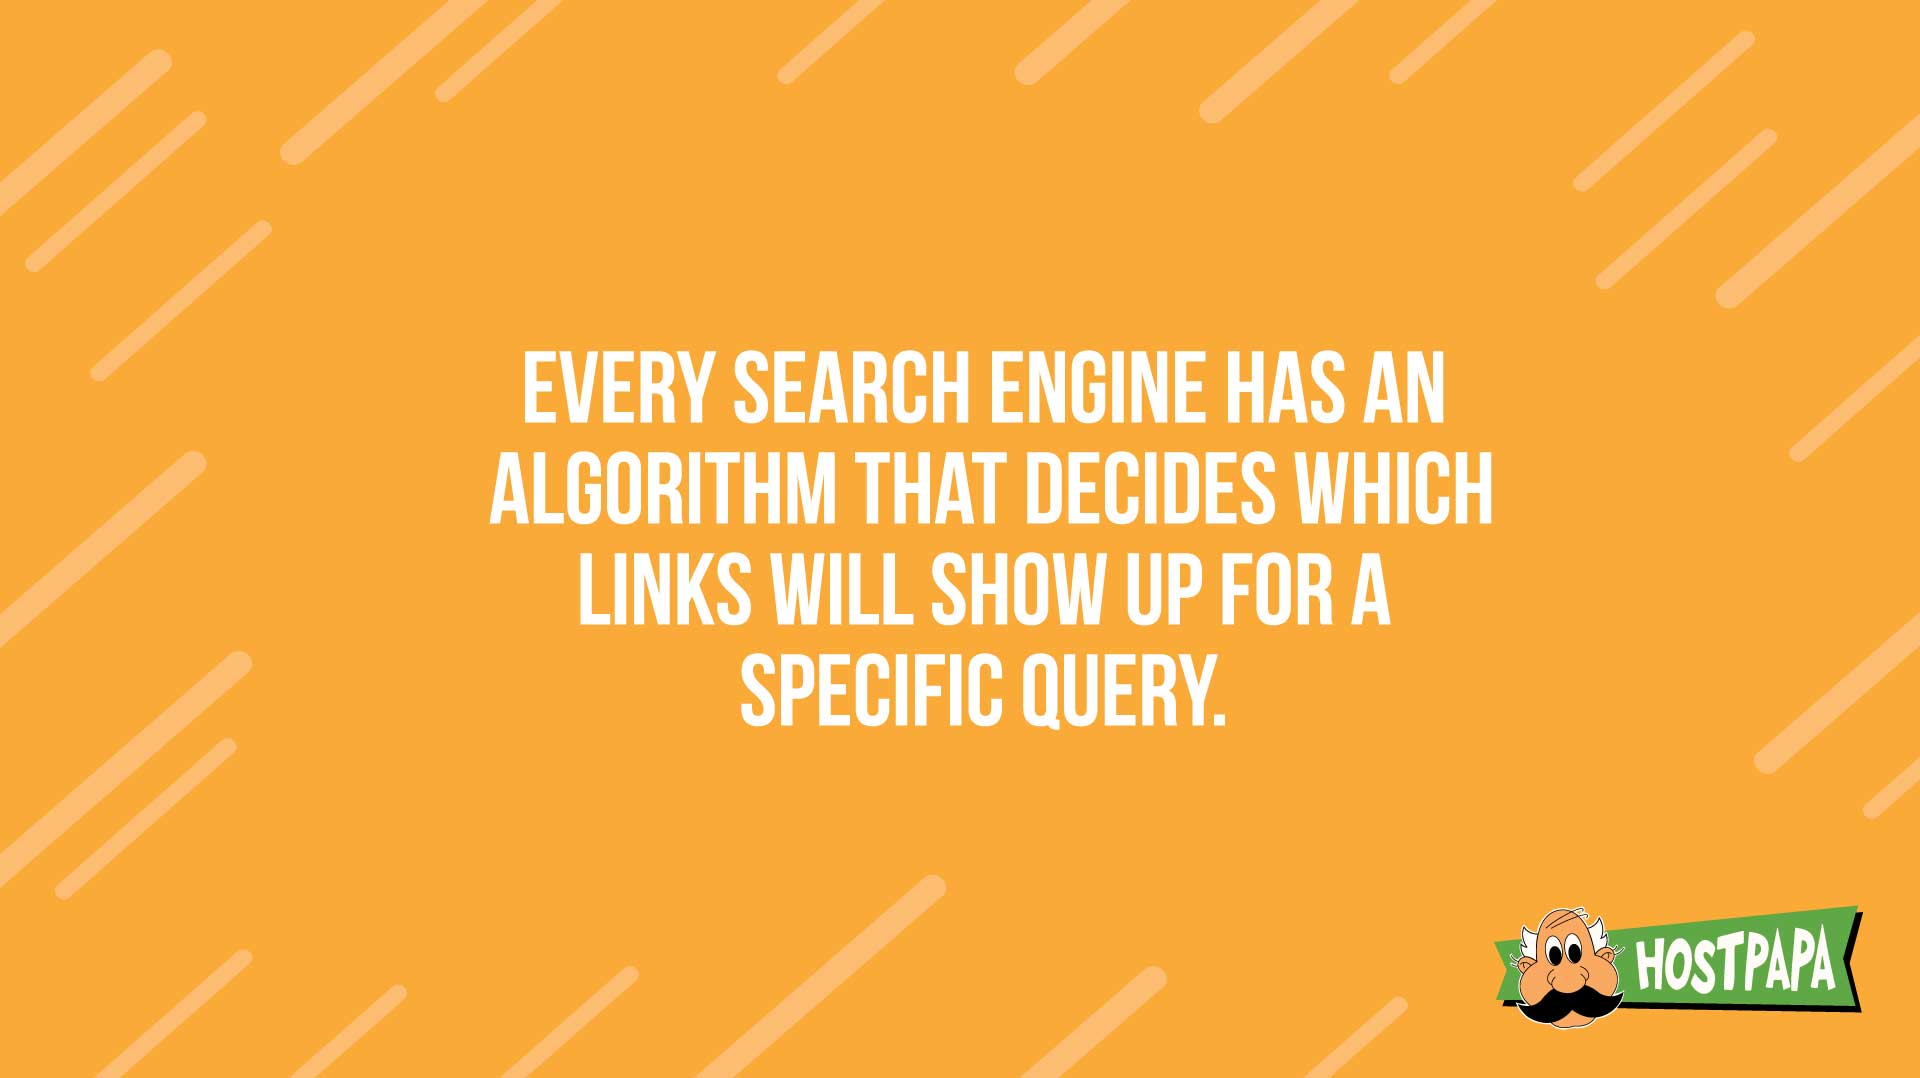 Every search engine has an algorithm that decides which links will show up for a specific query.